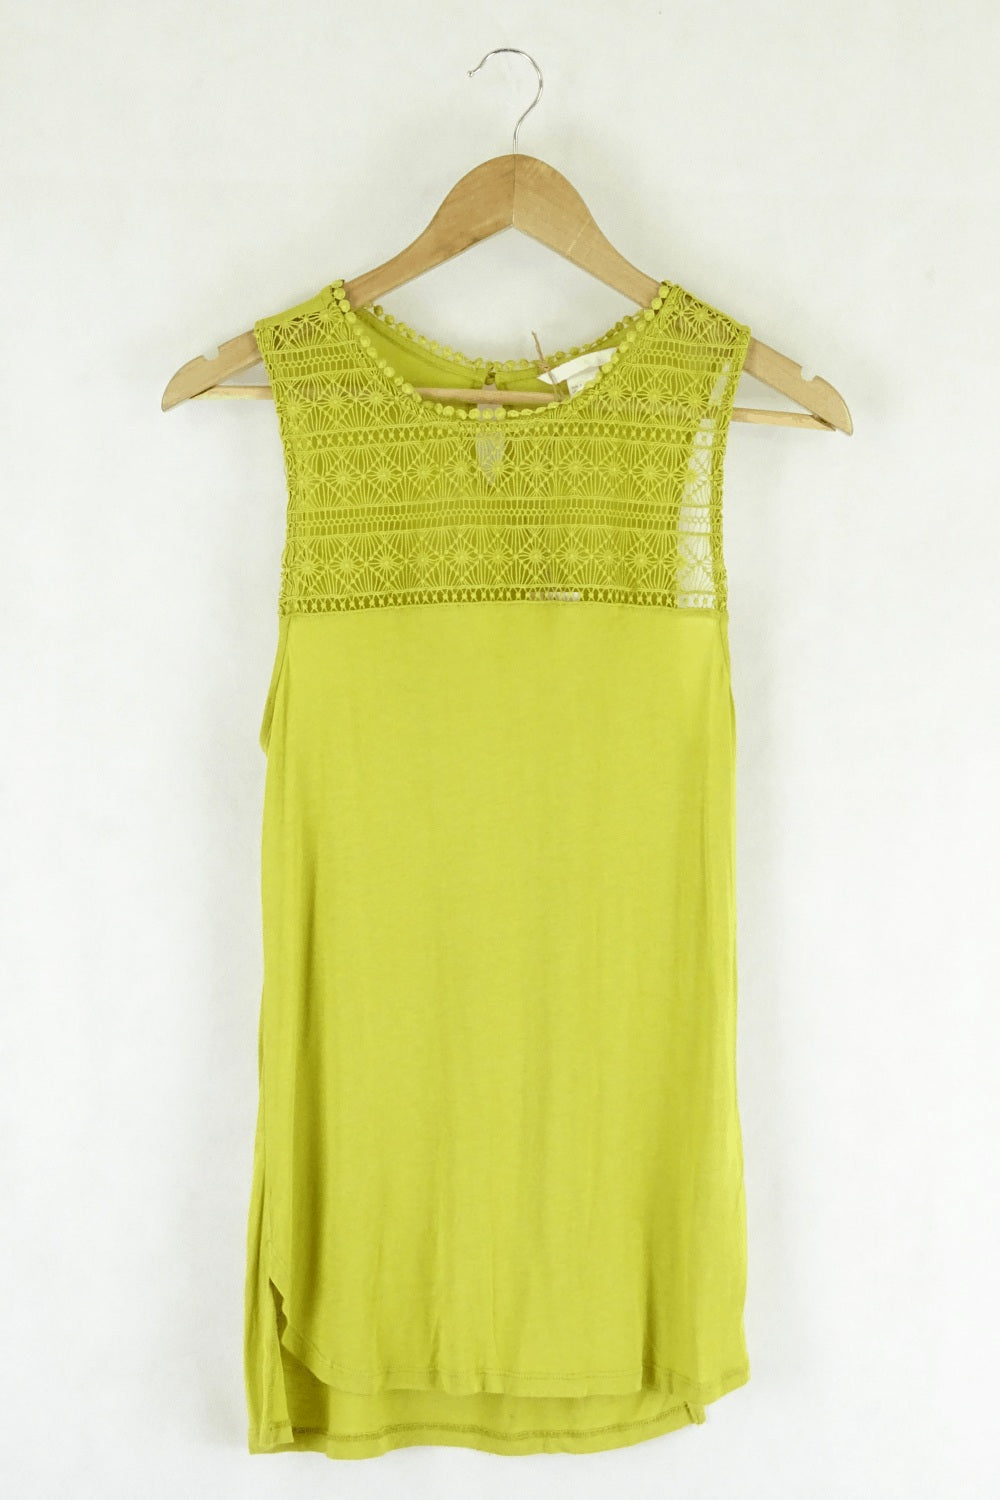 H&amp;M Yellow Mustard Top Lace S